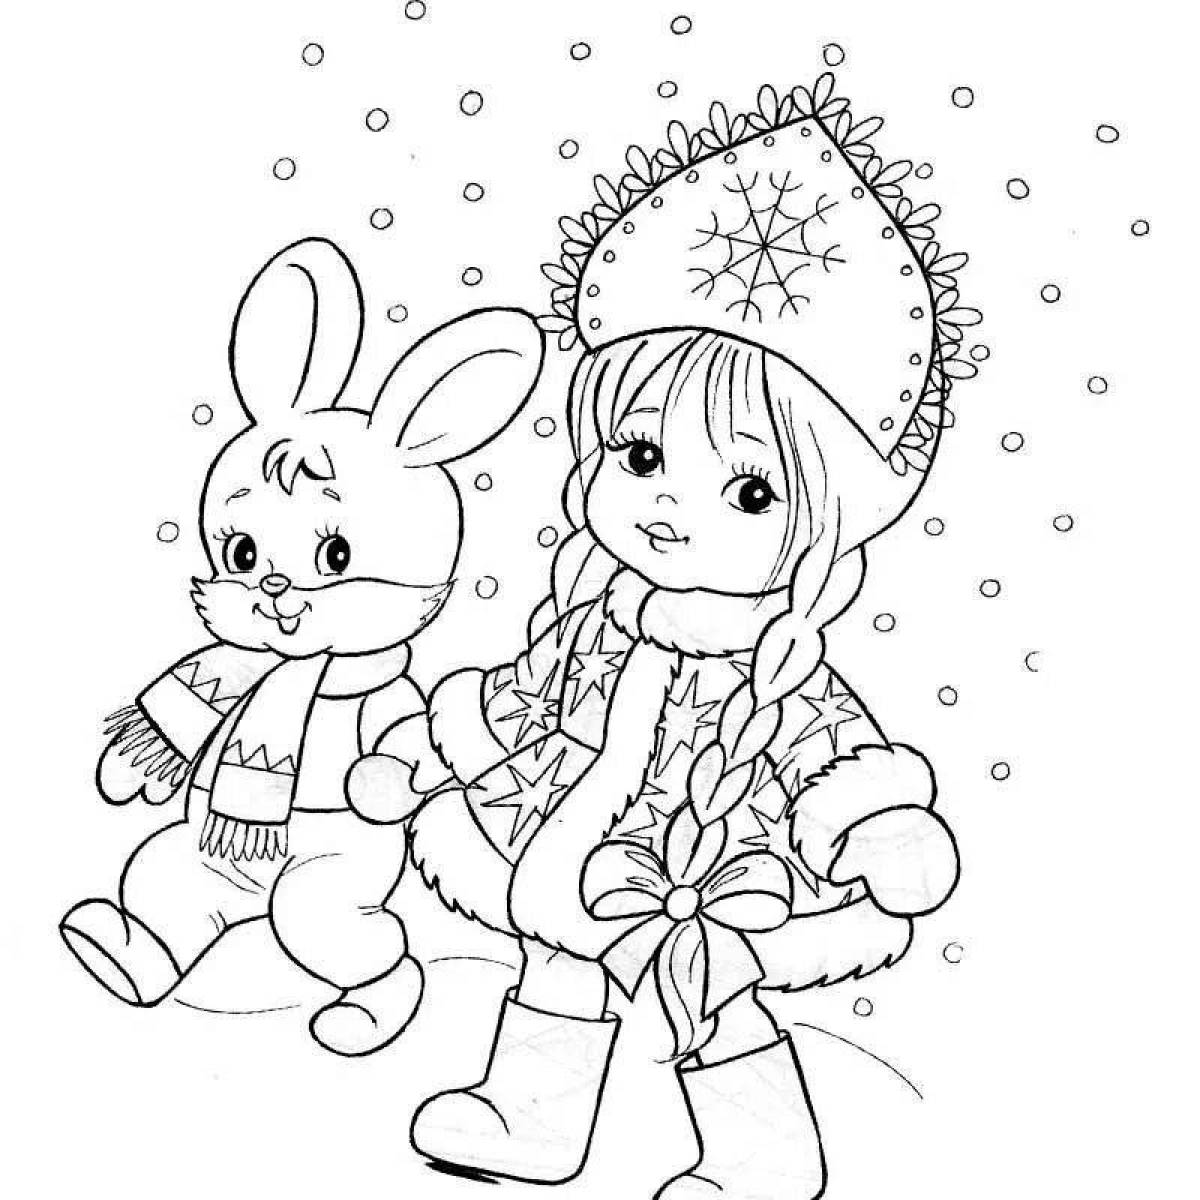 Coloring book blooming hare 2023 new year